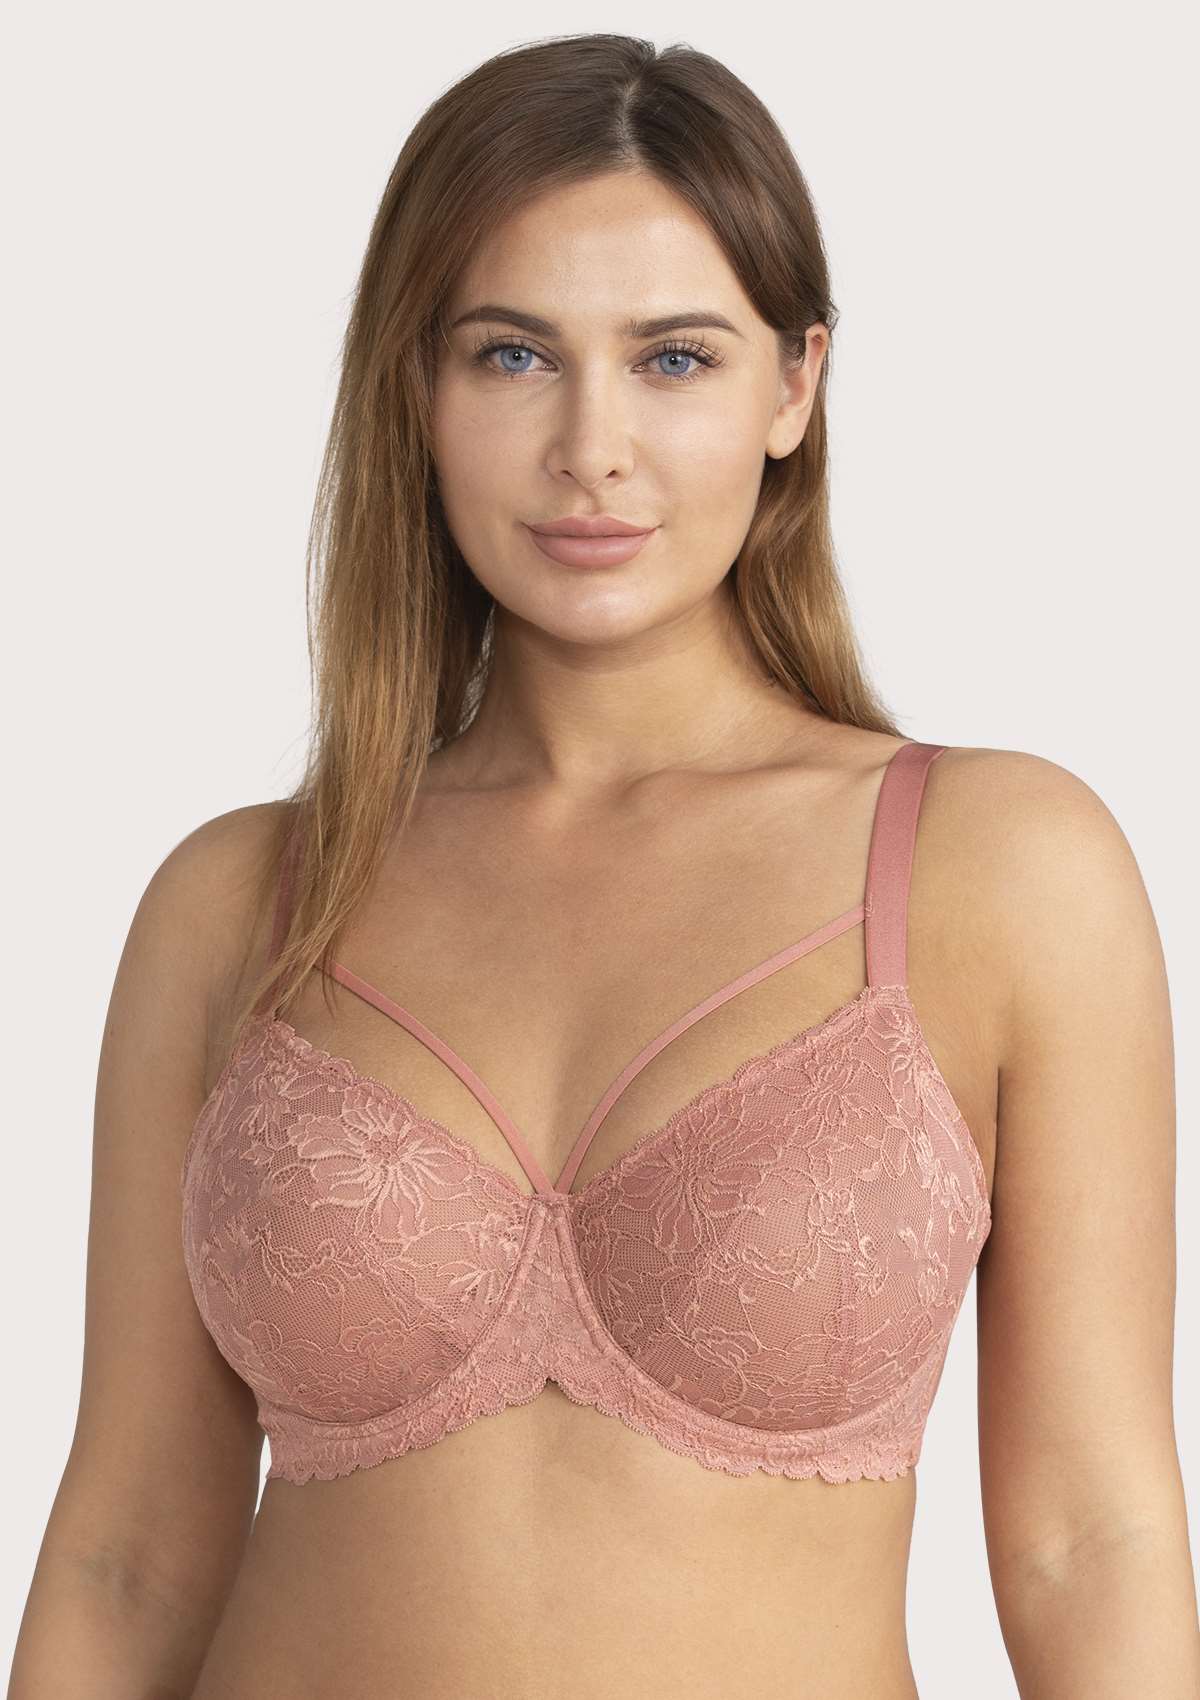 HSIA Pretty In Petals Lace Bra And Panty Sets: Bra For Big Boobs - Light Coral / 32 / D